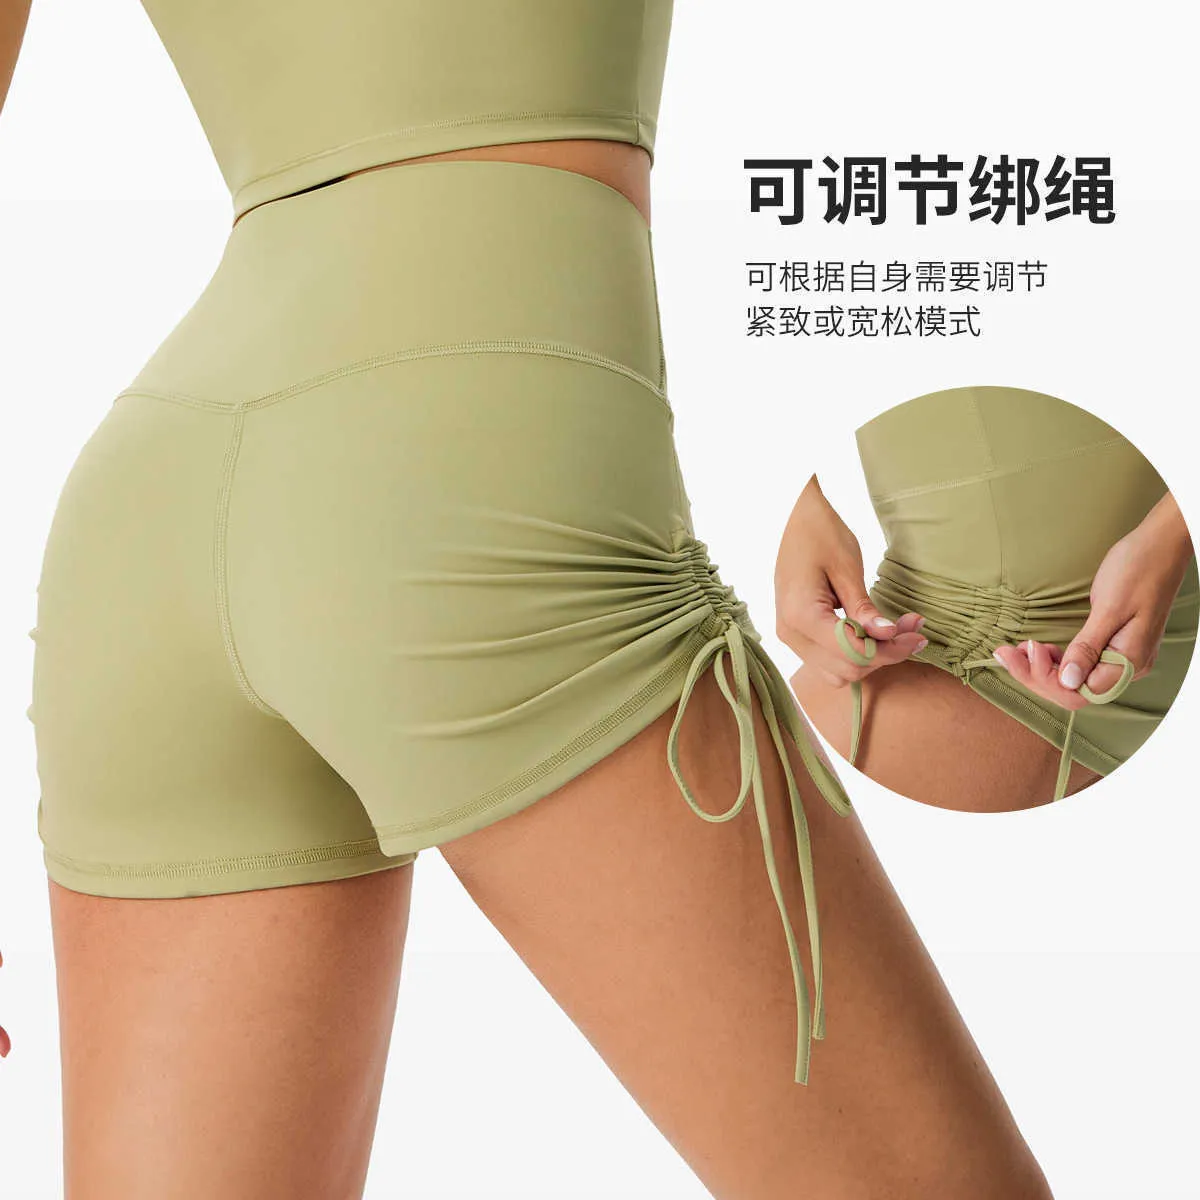 Sports DrawString Peach Yoga Outfits Shorts Bakteriostas Fitness Running Hot Pants High midje Casual Female Underwear